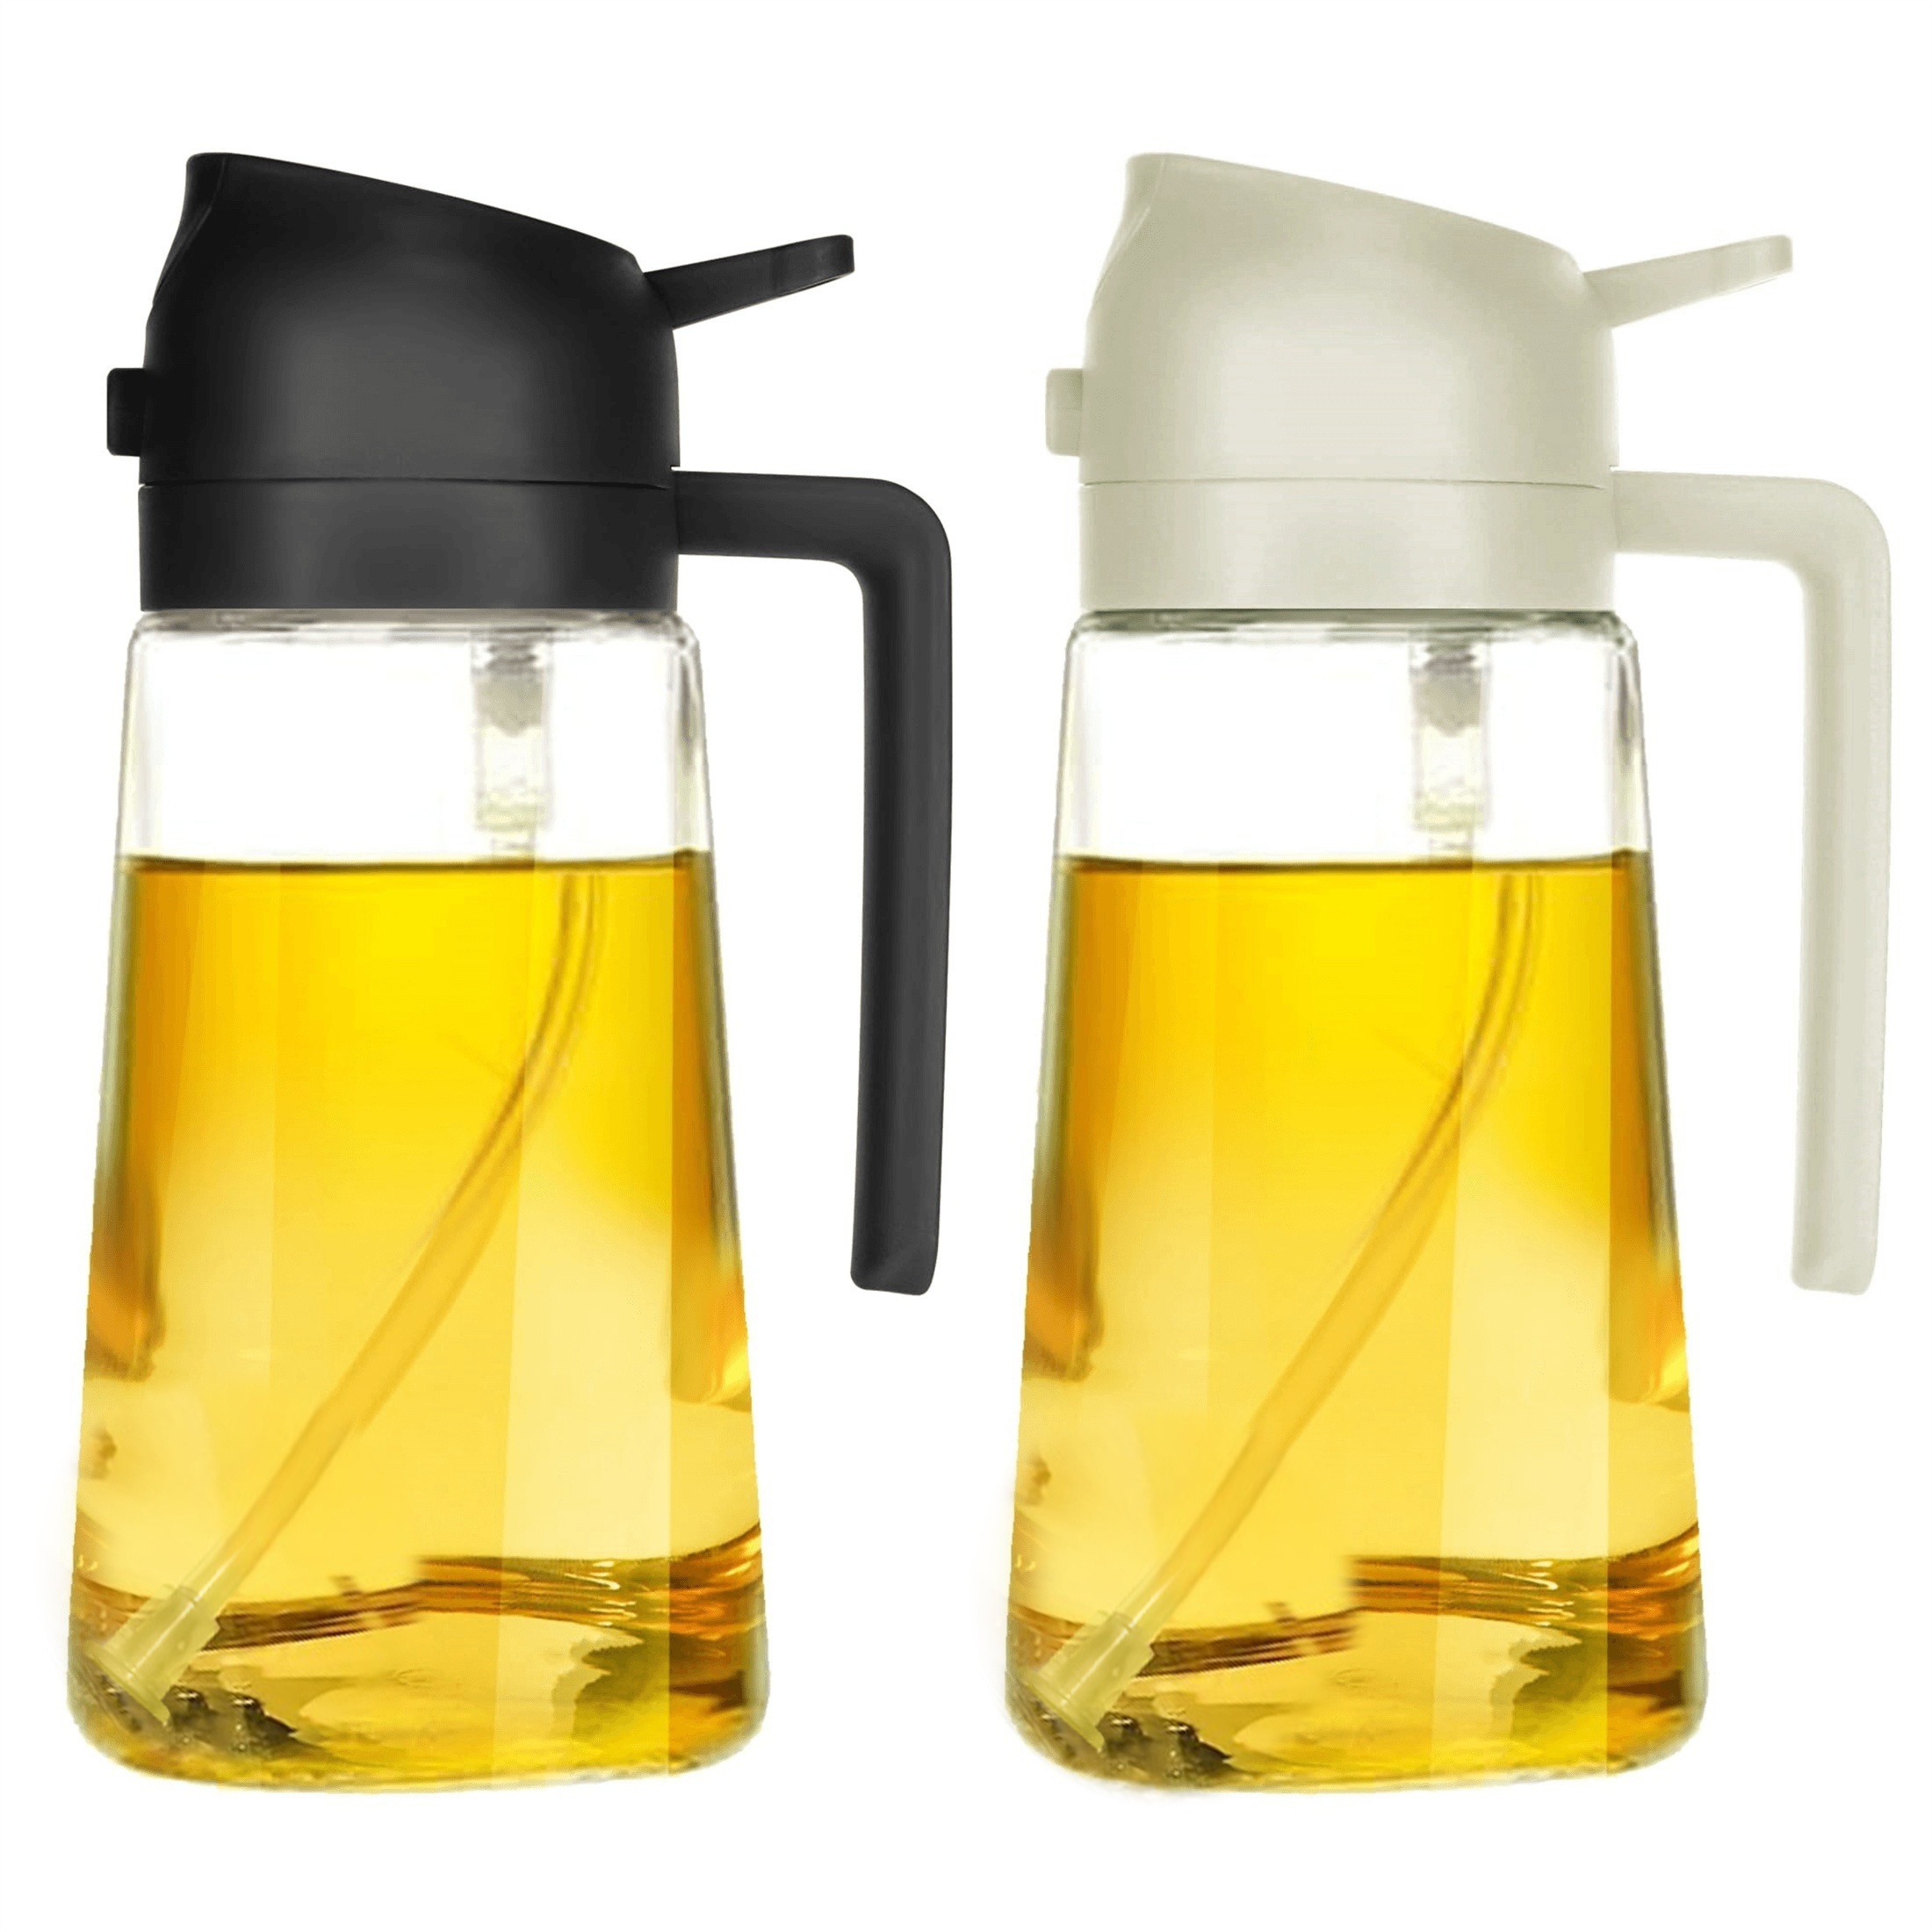 

2-in-1 Glass Oil Sprayer Dispenser With Automatic Lid For Cooking, Bbq, Salad, Baking - Pvc Free, High Borosilicate Glass Olive Oil Mister Bottle For Kitchen - 1pc